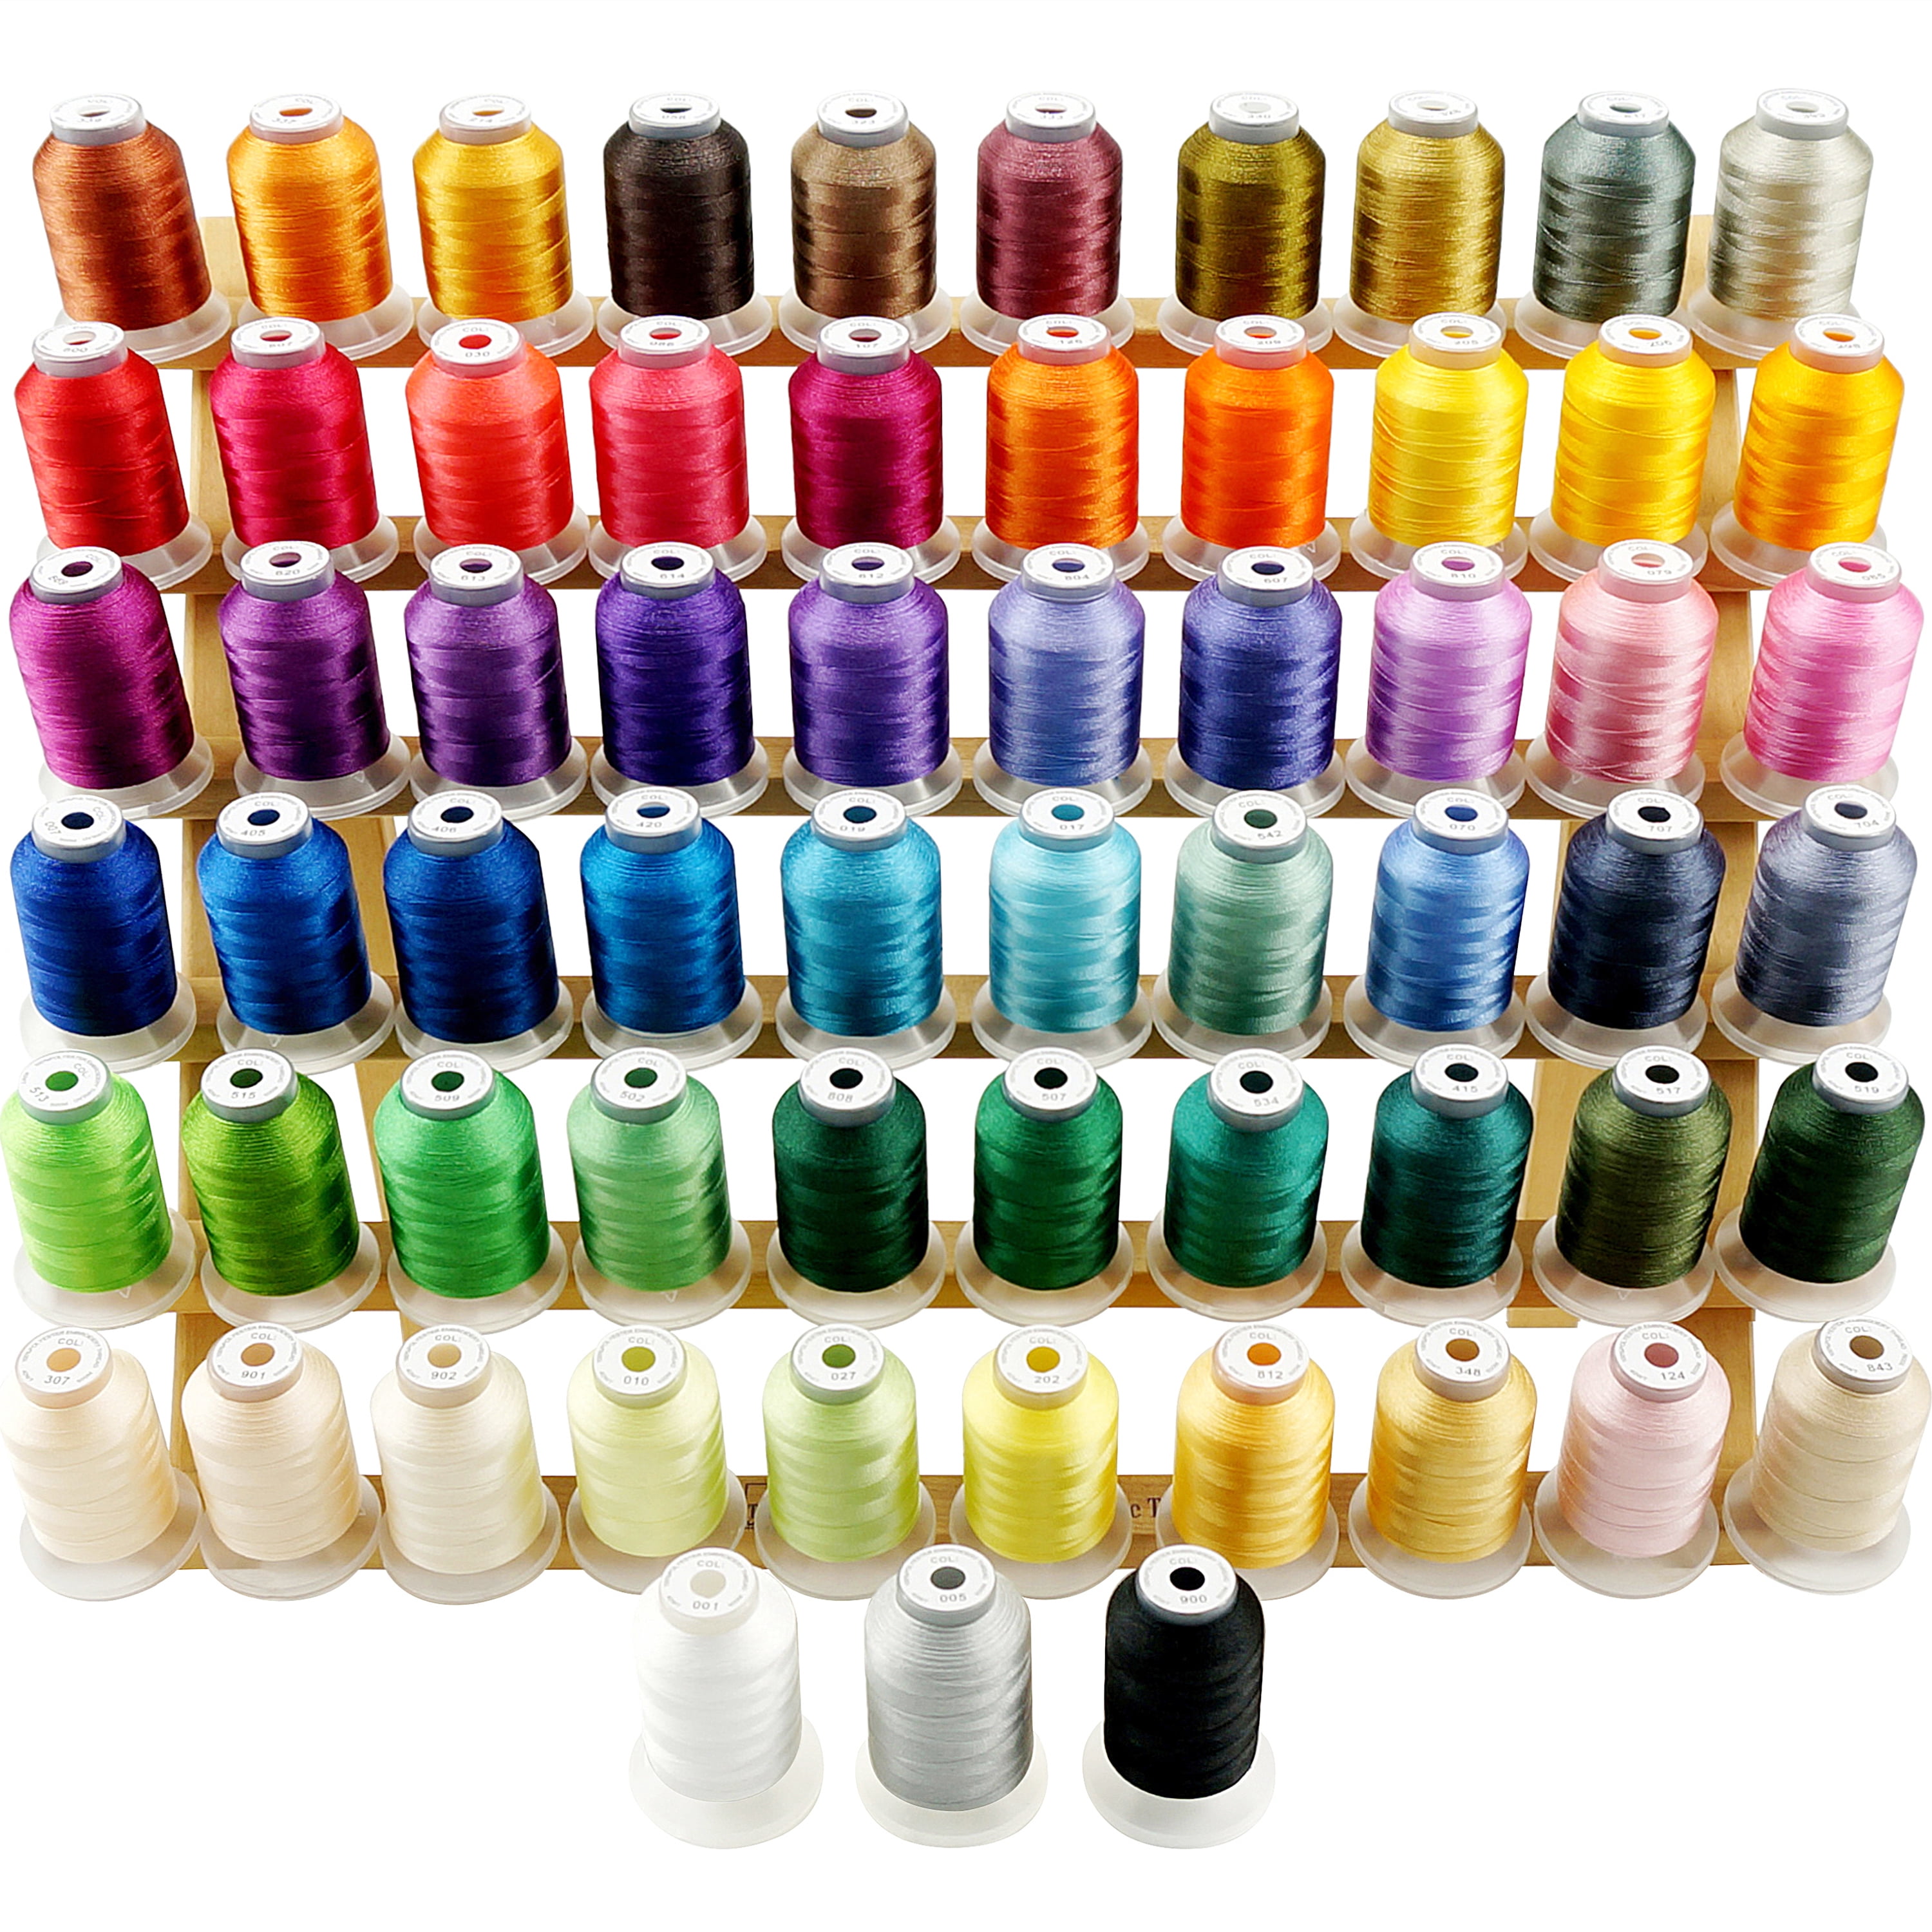 New brothread 63 Brother Colors Polyester Embroidery Machine Thread Kit  500M (550Y) Each Spool